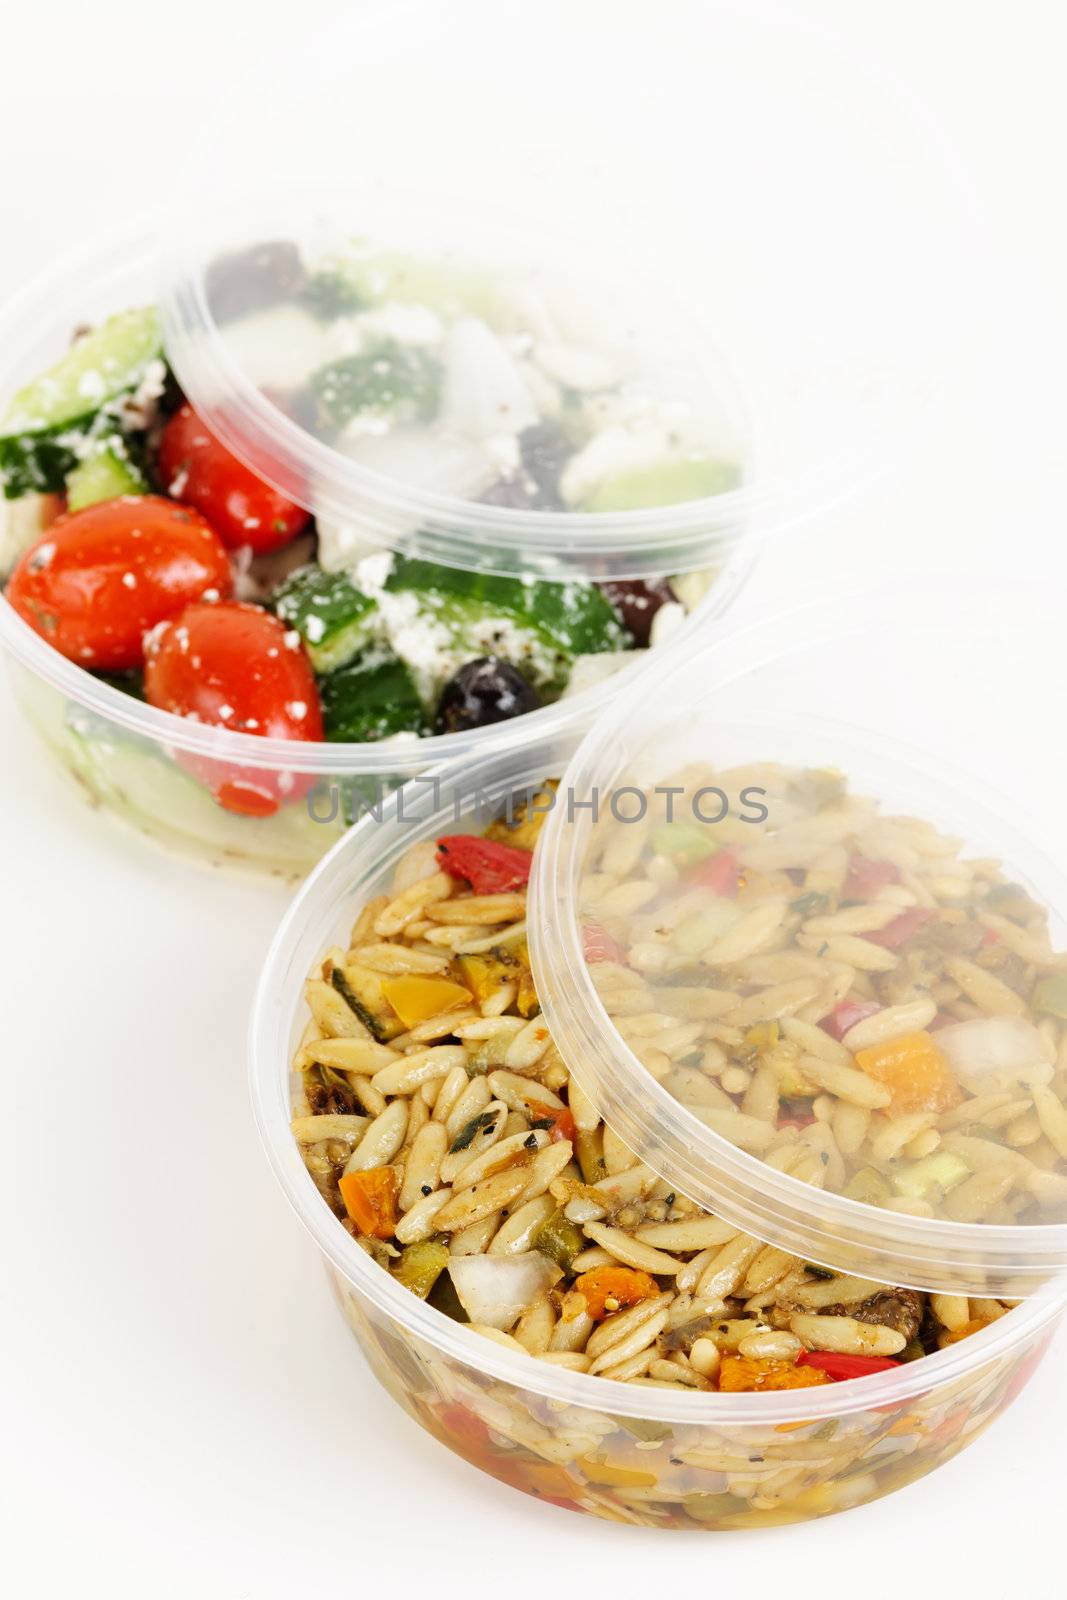 Prepared salads in takeout containers by elenathewise